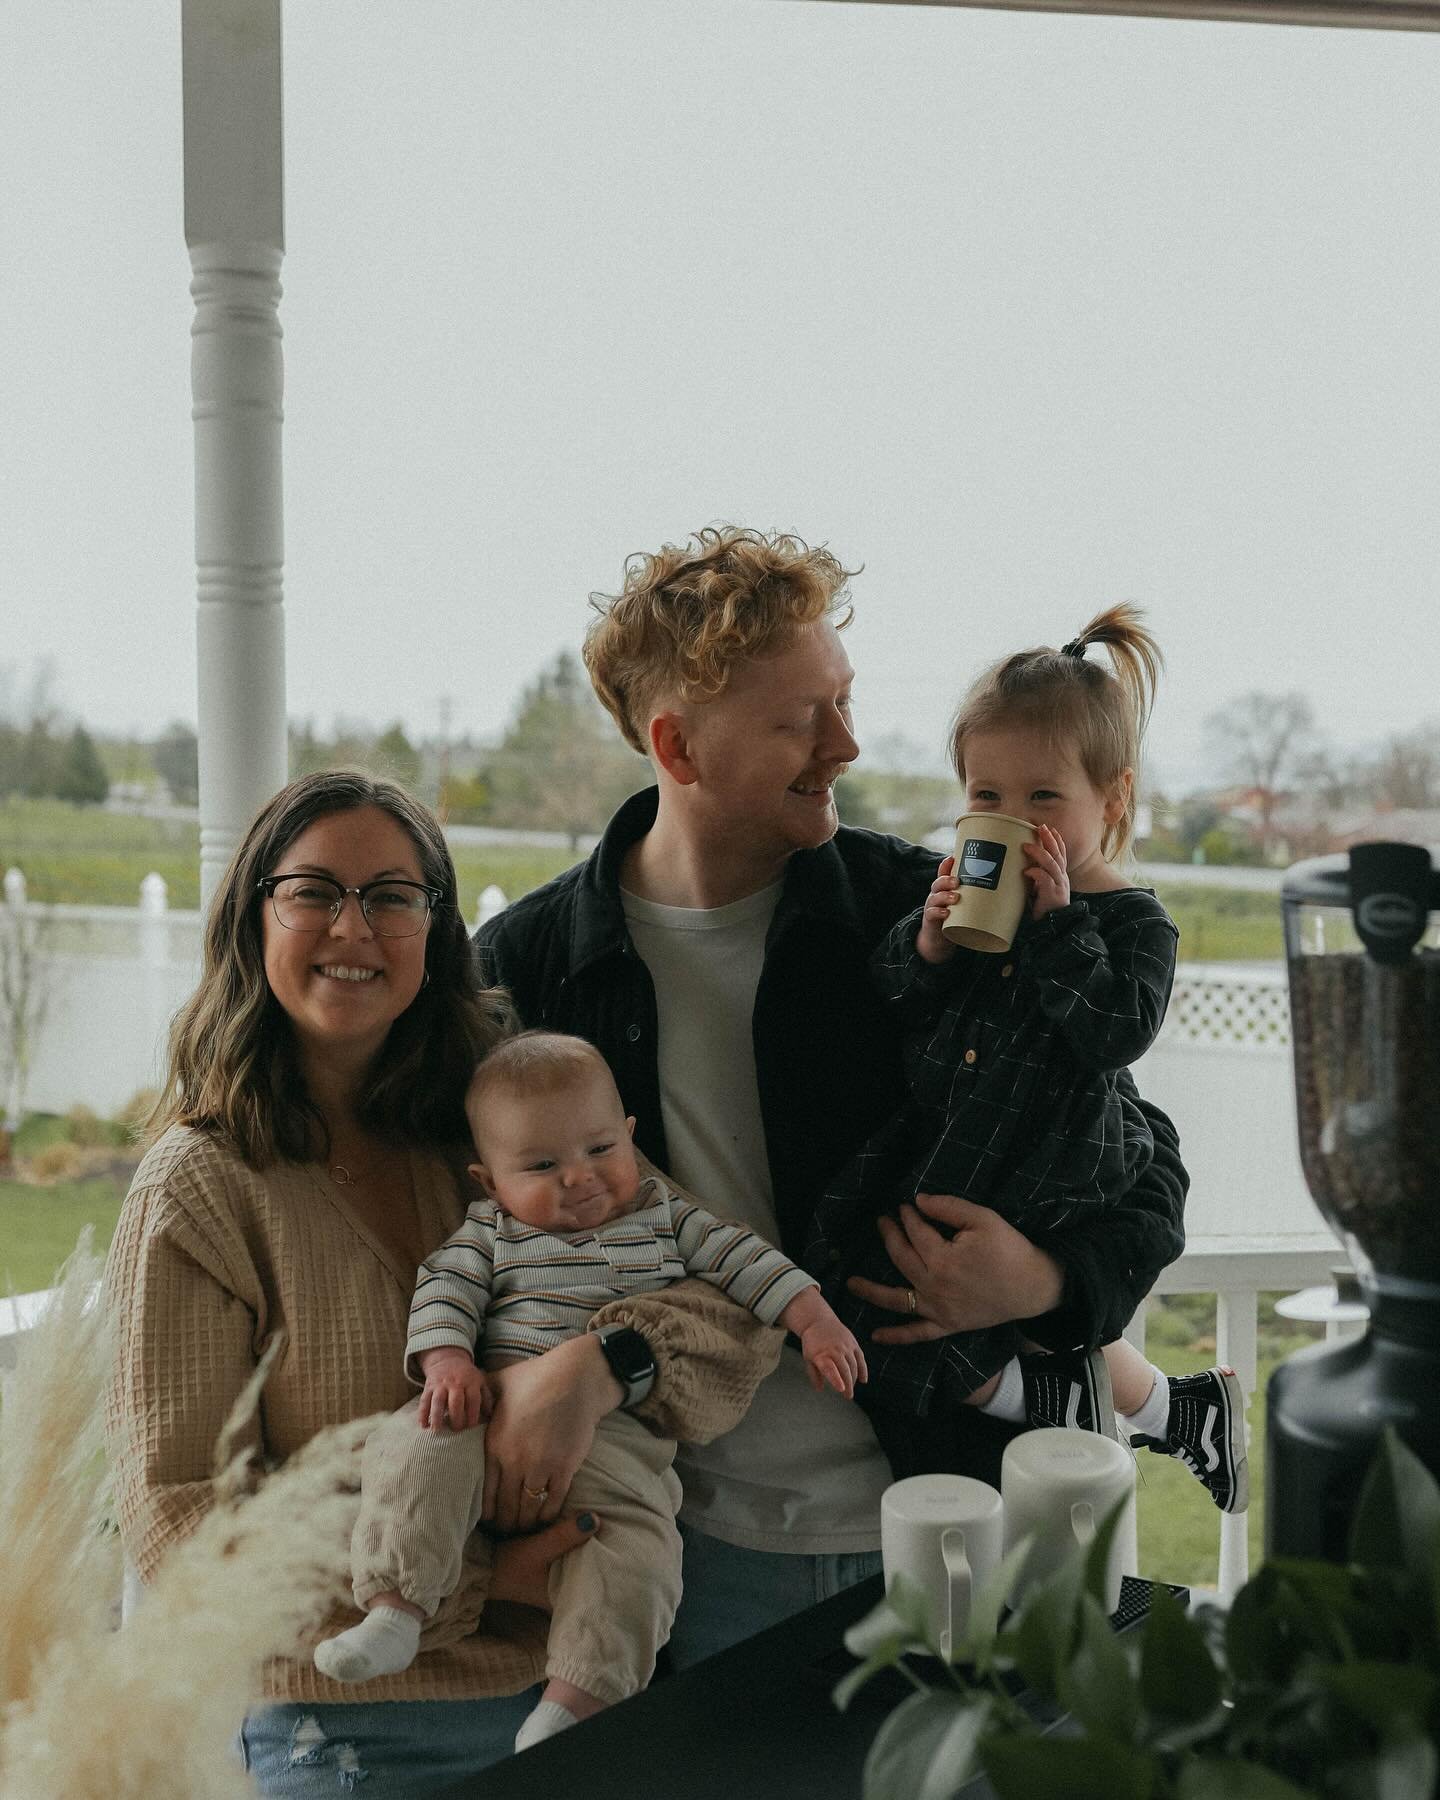 Hey again! This is us. Drew, Steph and our kids Nova &amp; Ollie. Floreat Coffee is our specialty coffee cart! We are here to enhance your events with amazing coffee and hospitality. Anything from your wedding day, to a backyard birthday, we can brin